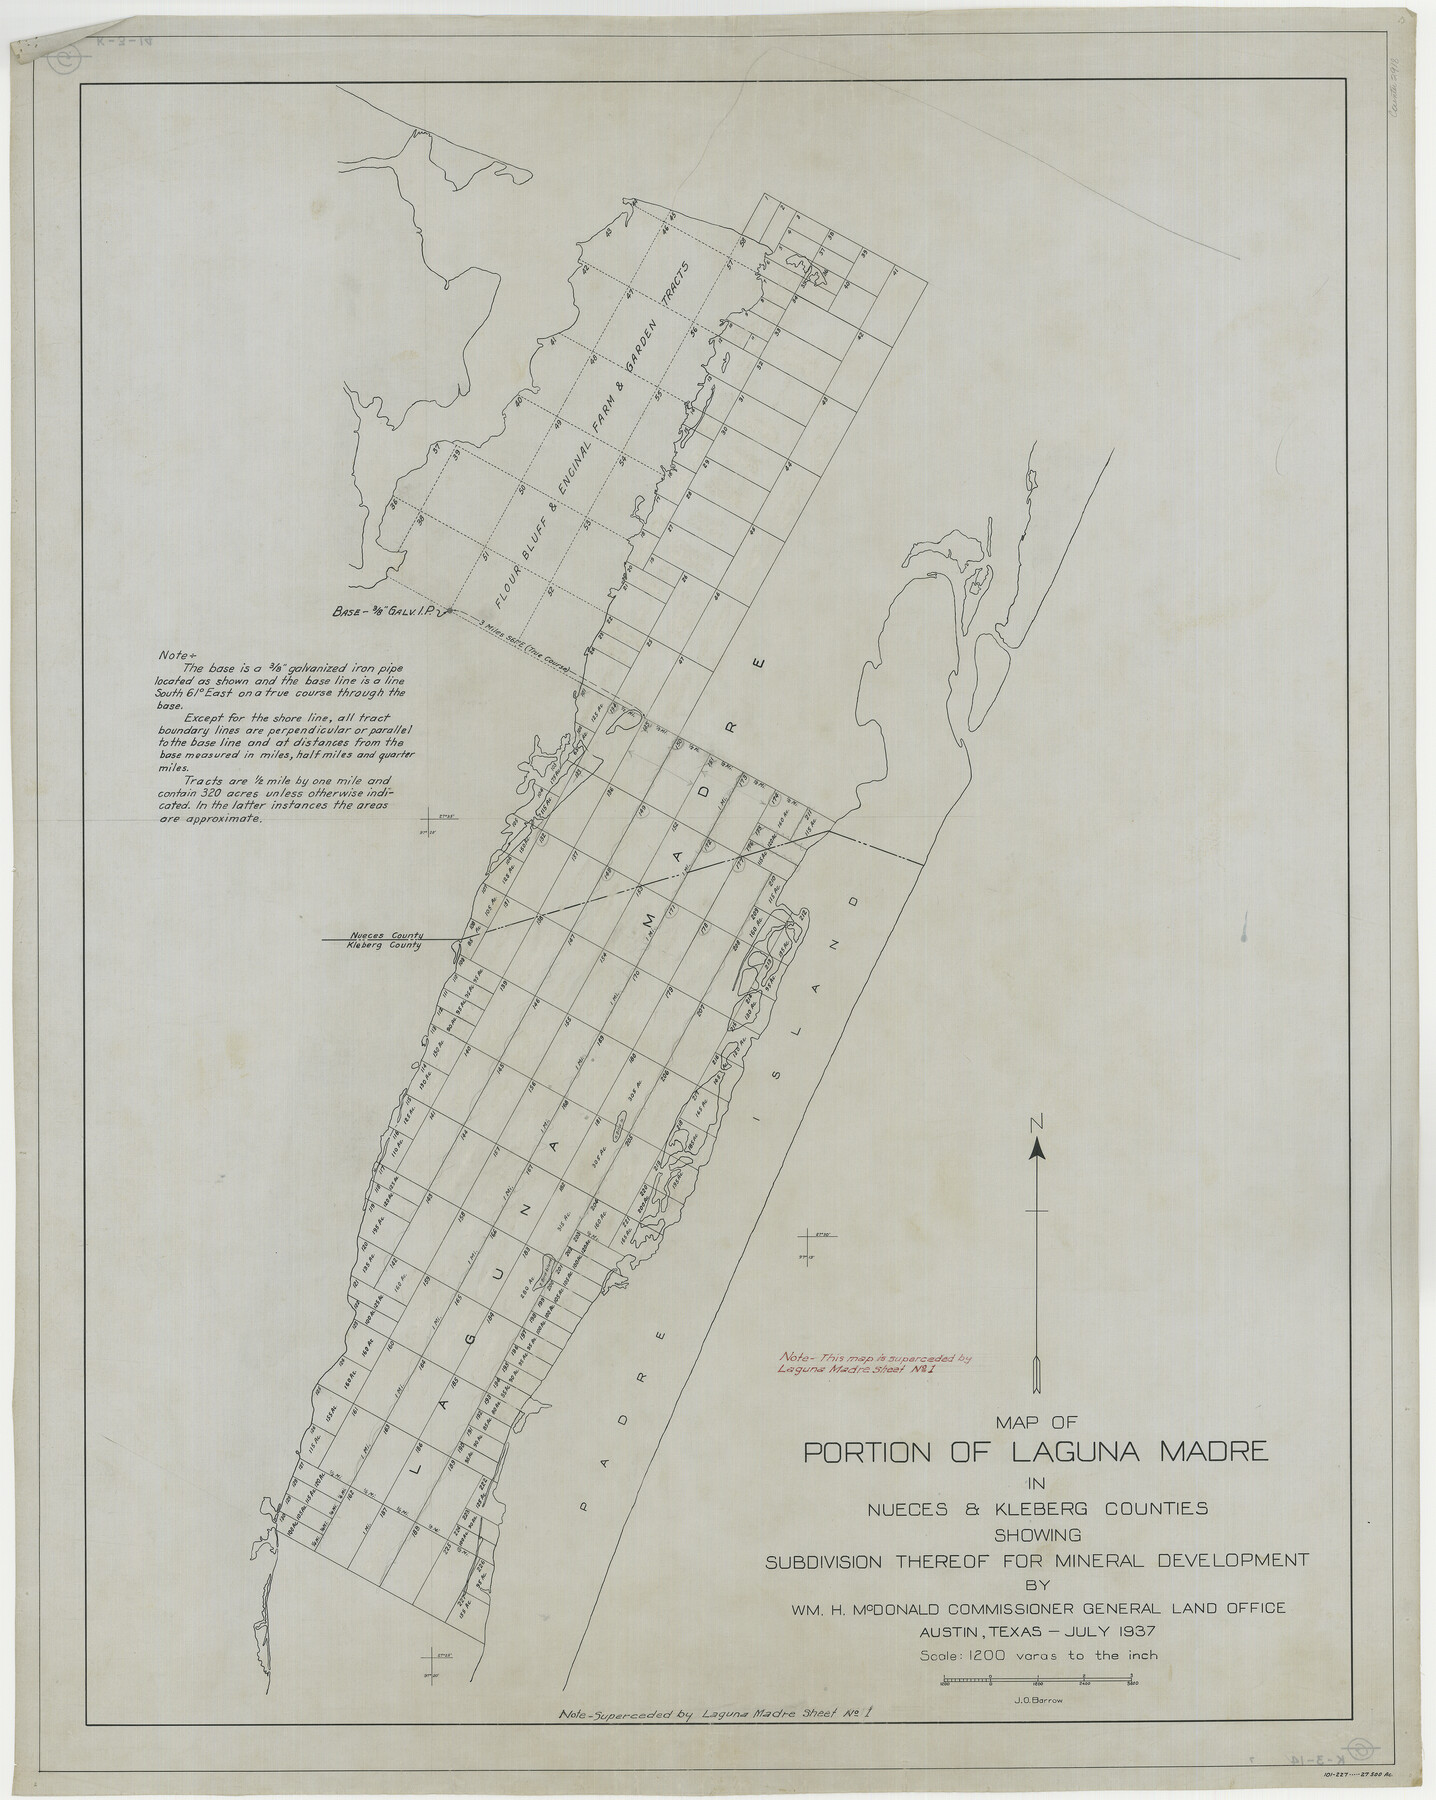 2918, Map of Portion of Laguna Madre in Nueces & Kleberg Counties showing subdivision thereof for mineral development, General Map Collection